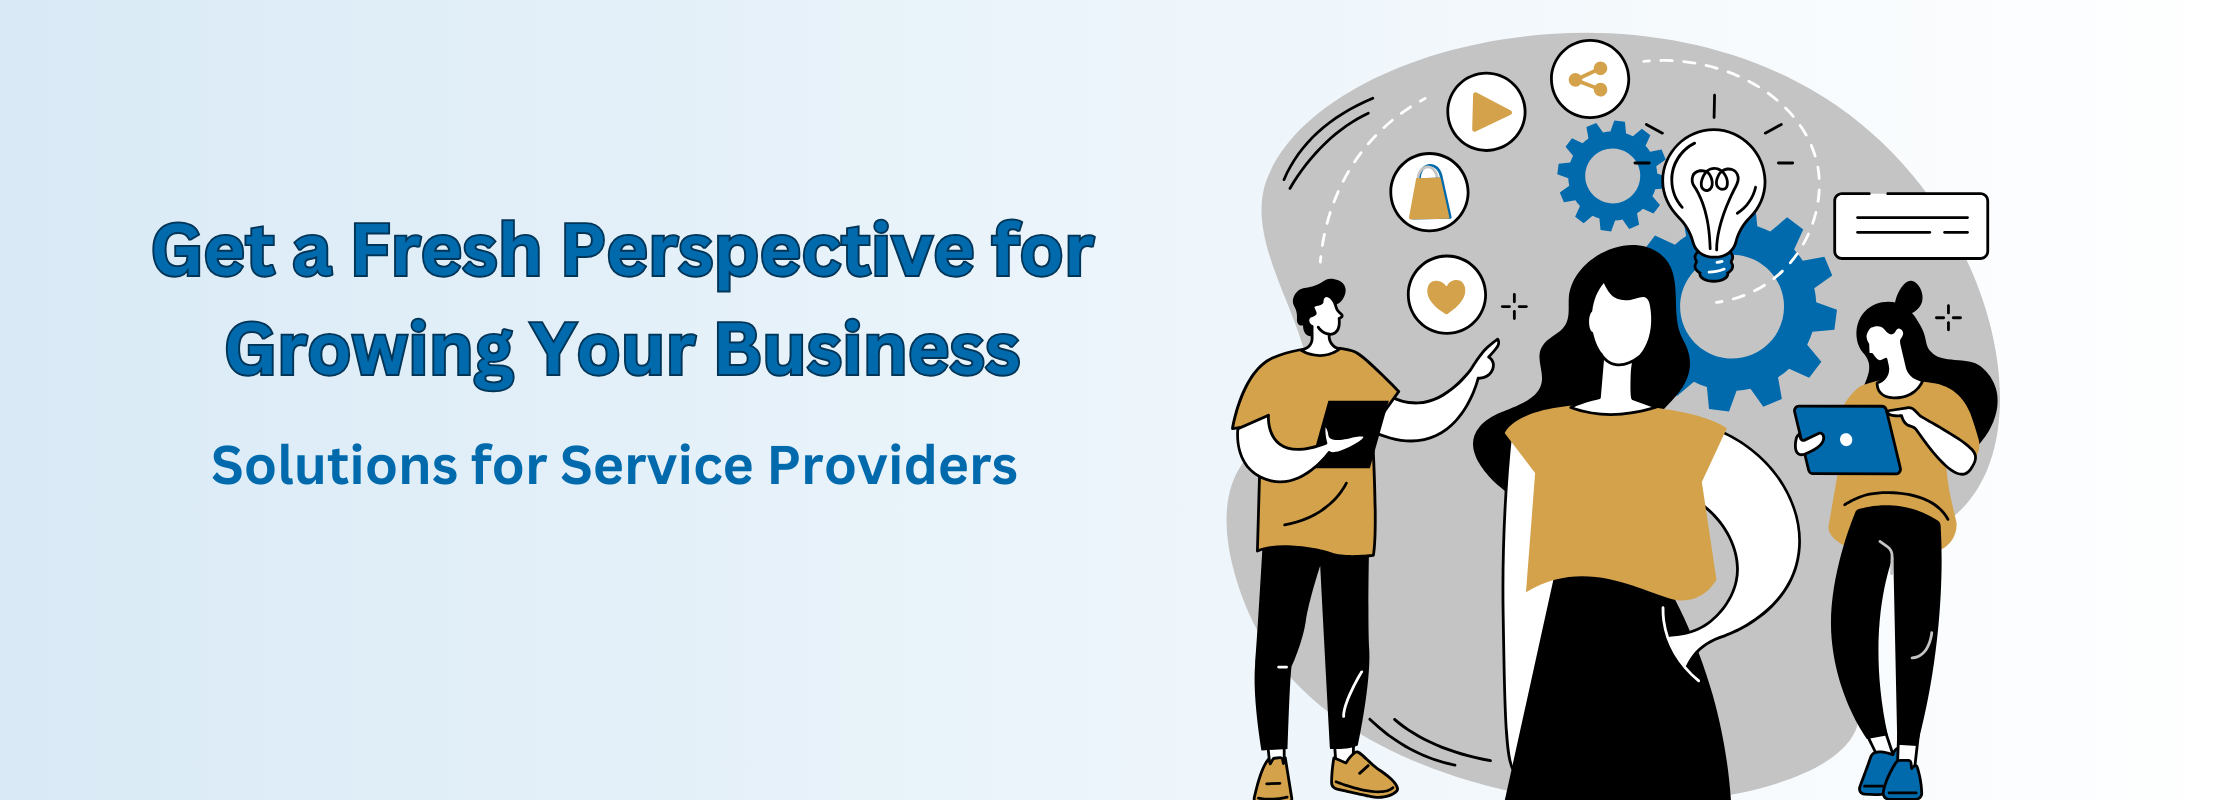 Get a Fresh Perspective for Growing Your Business Solutions for Service Providers